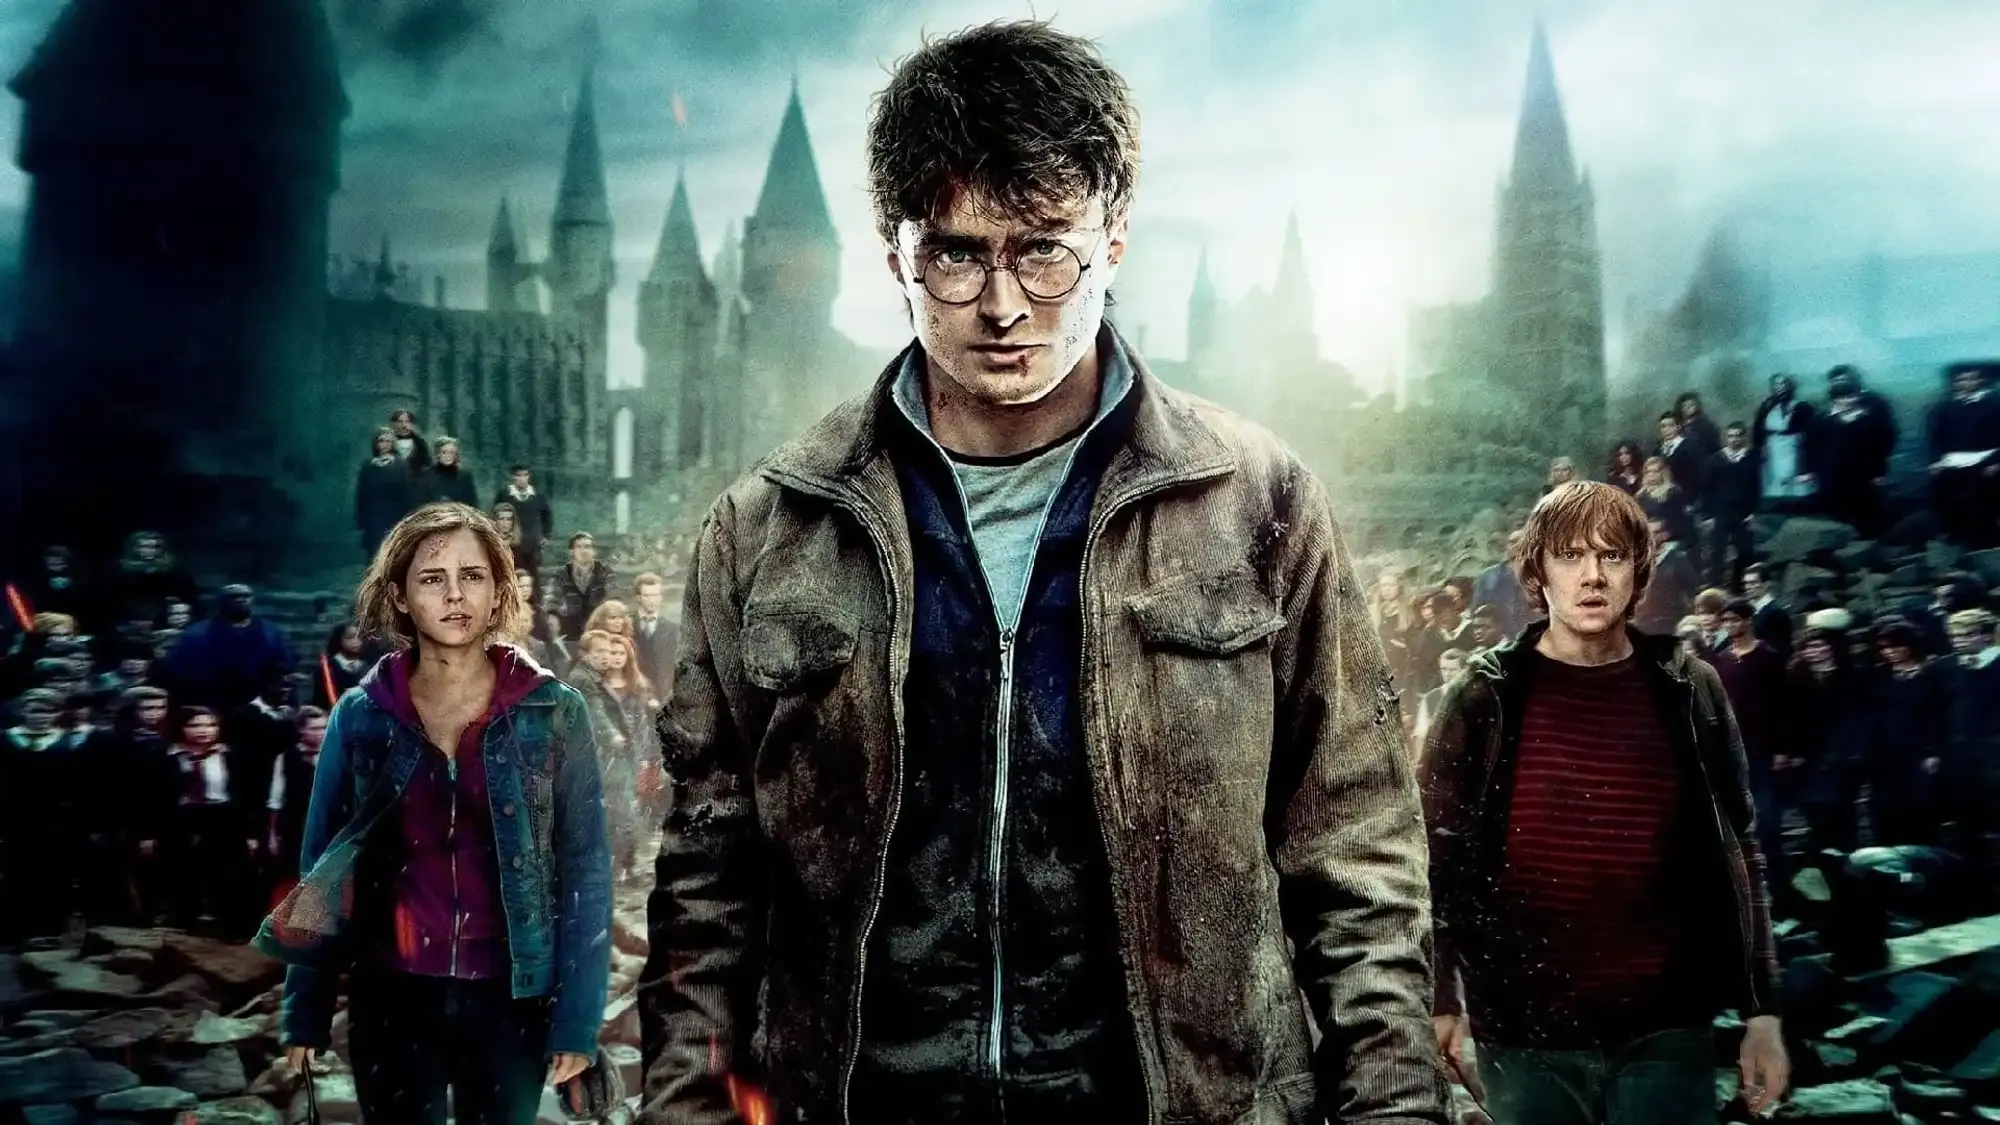 Harry Potter and the Deathly Hallows: Part 2 movie review